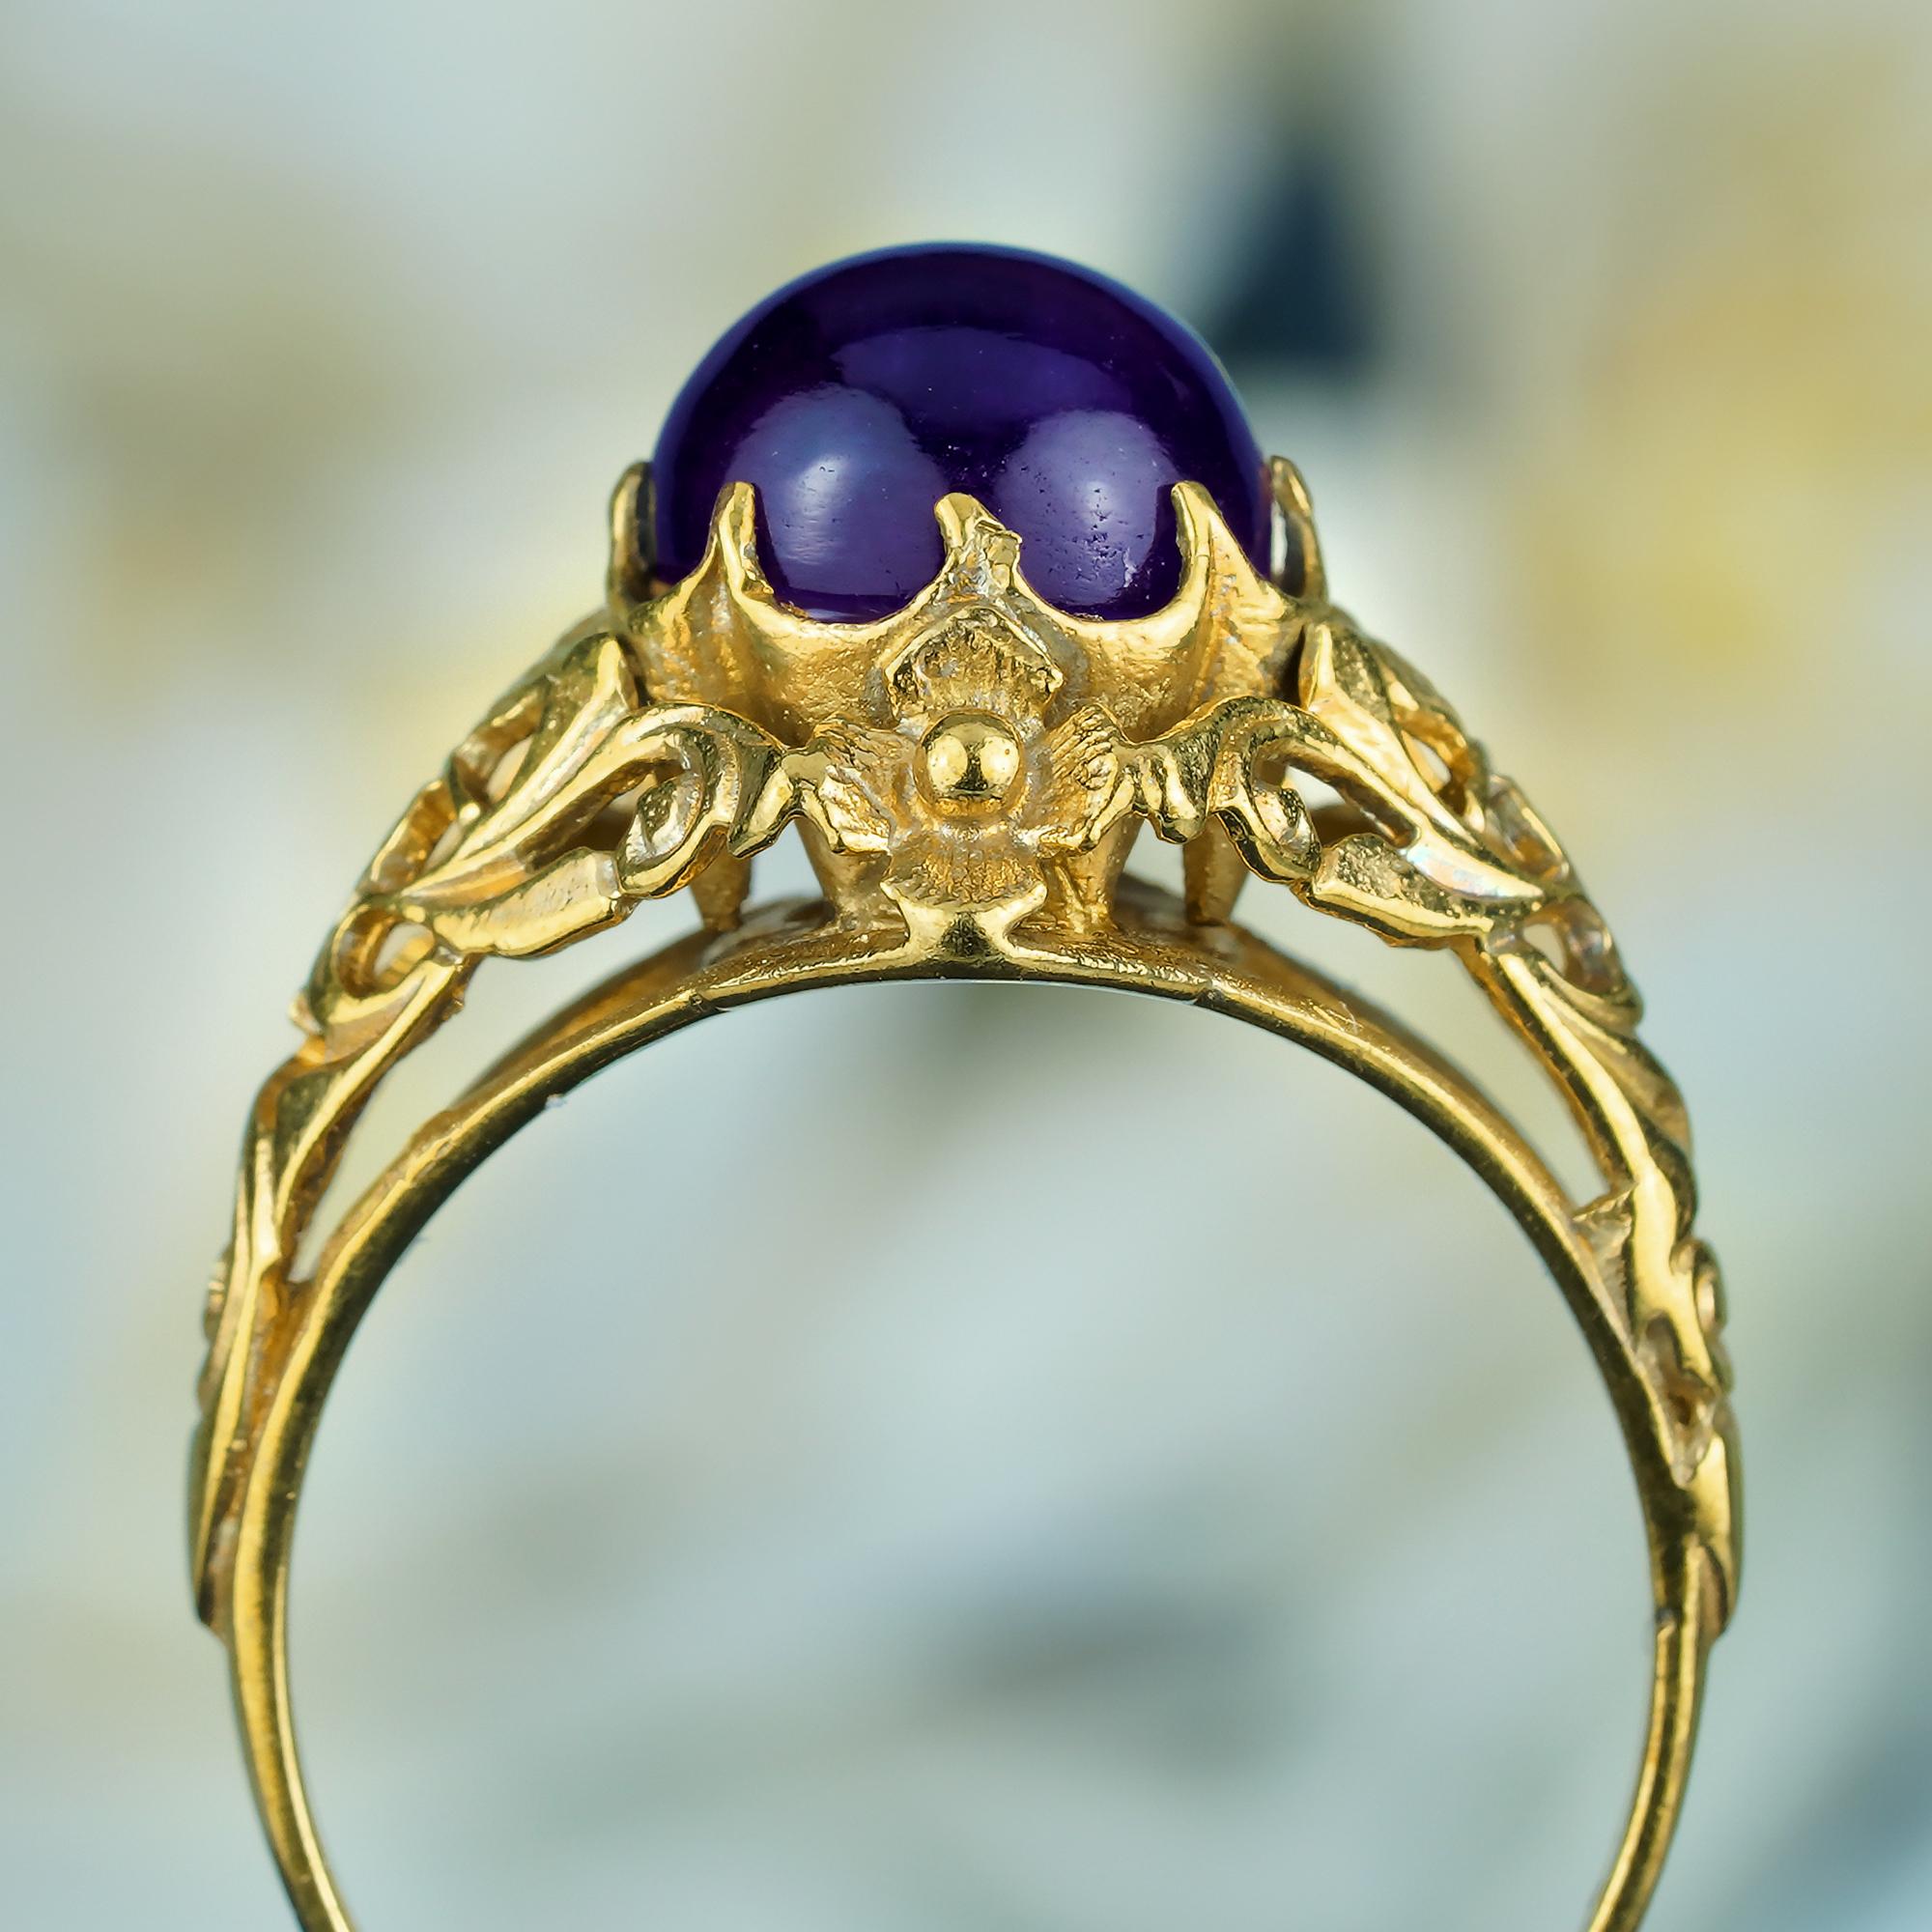 For Sale:  Natural Cabochon Amethyst Vintage Style Filigree Ring in Solid 9K Yellow Gold 5